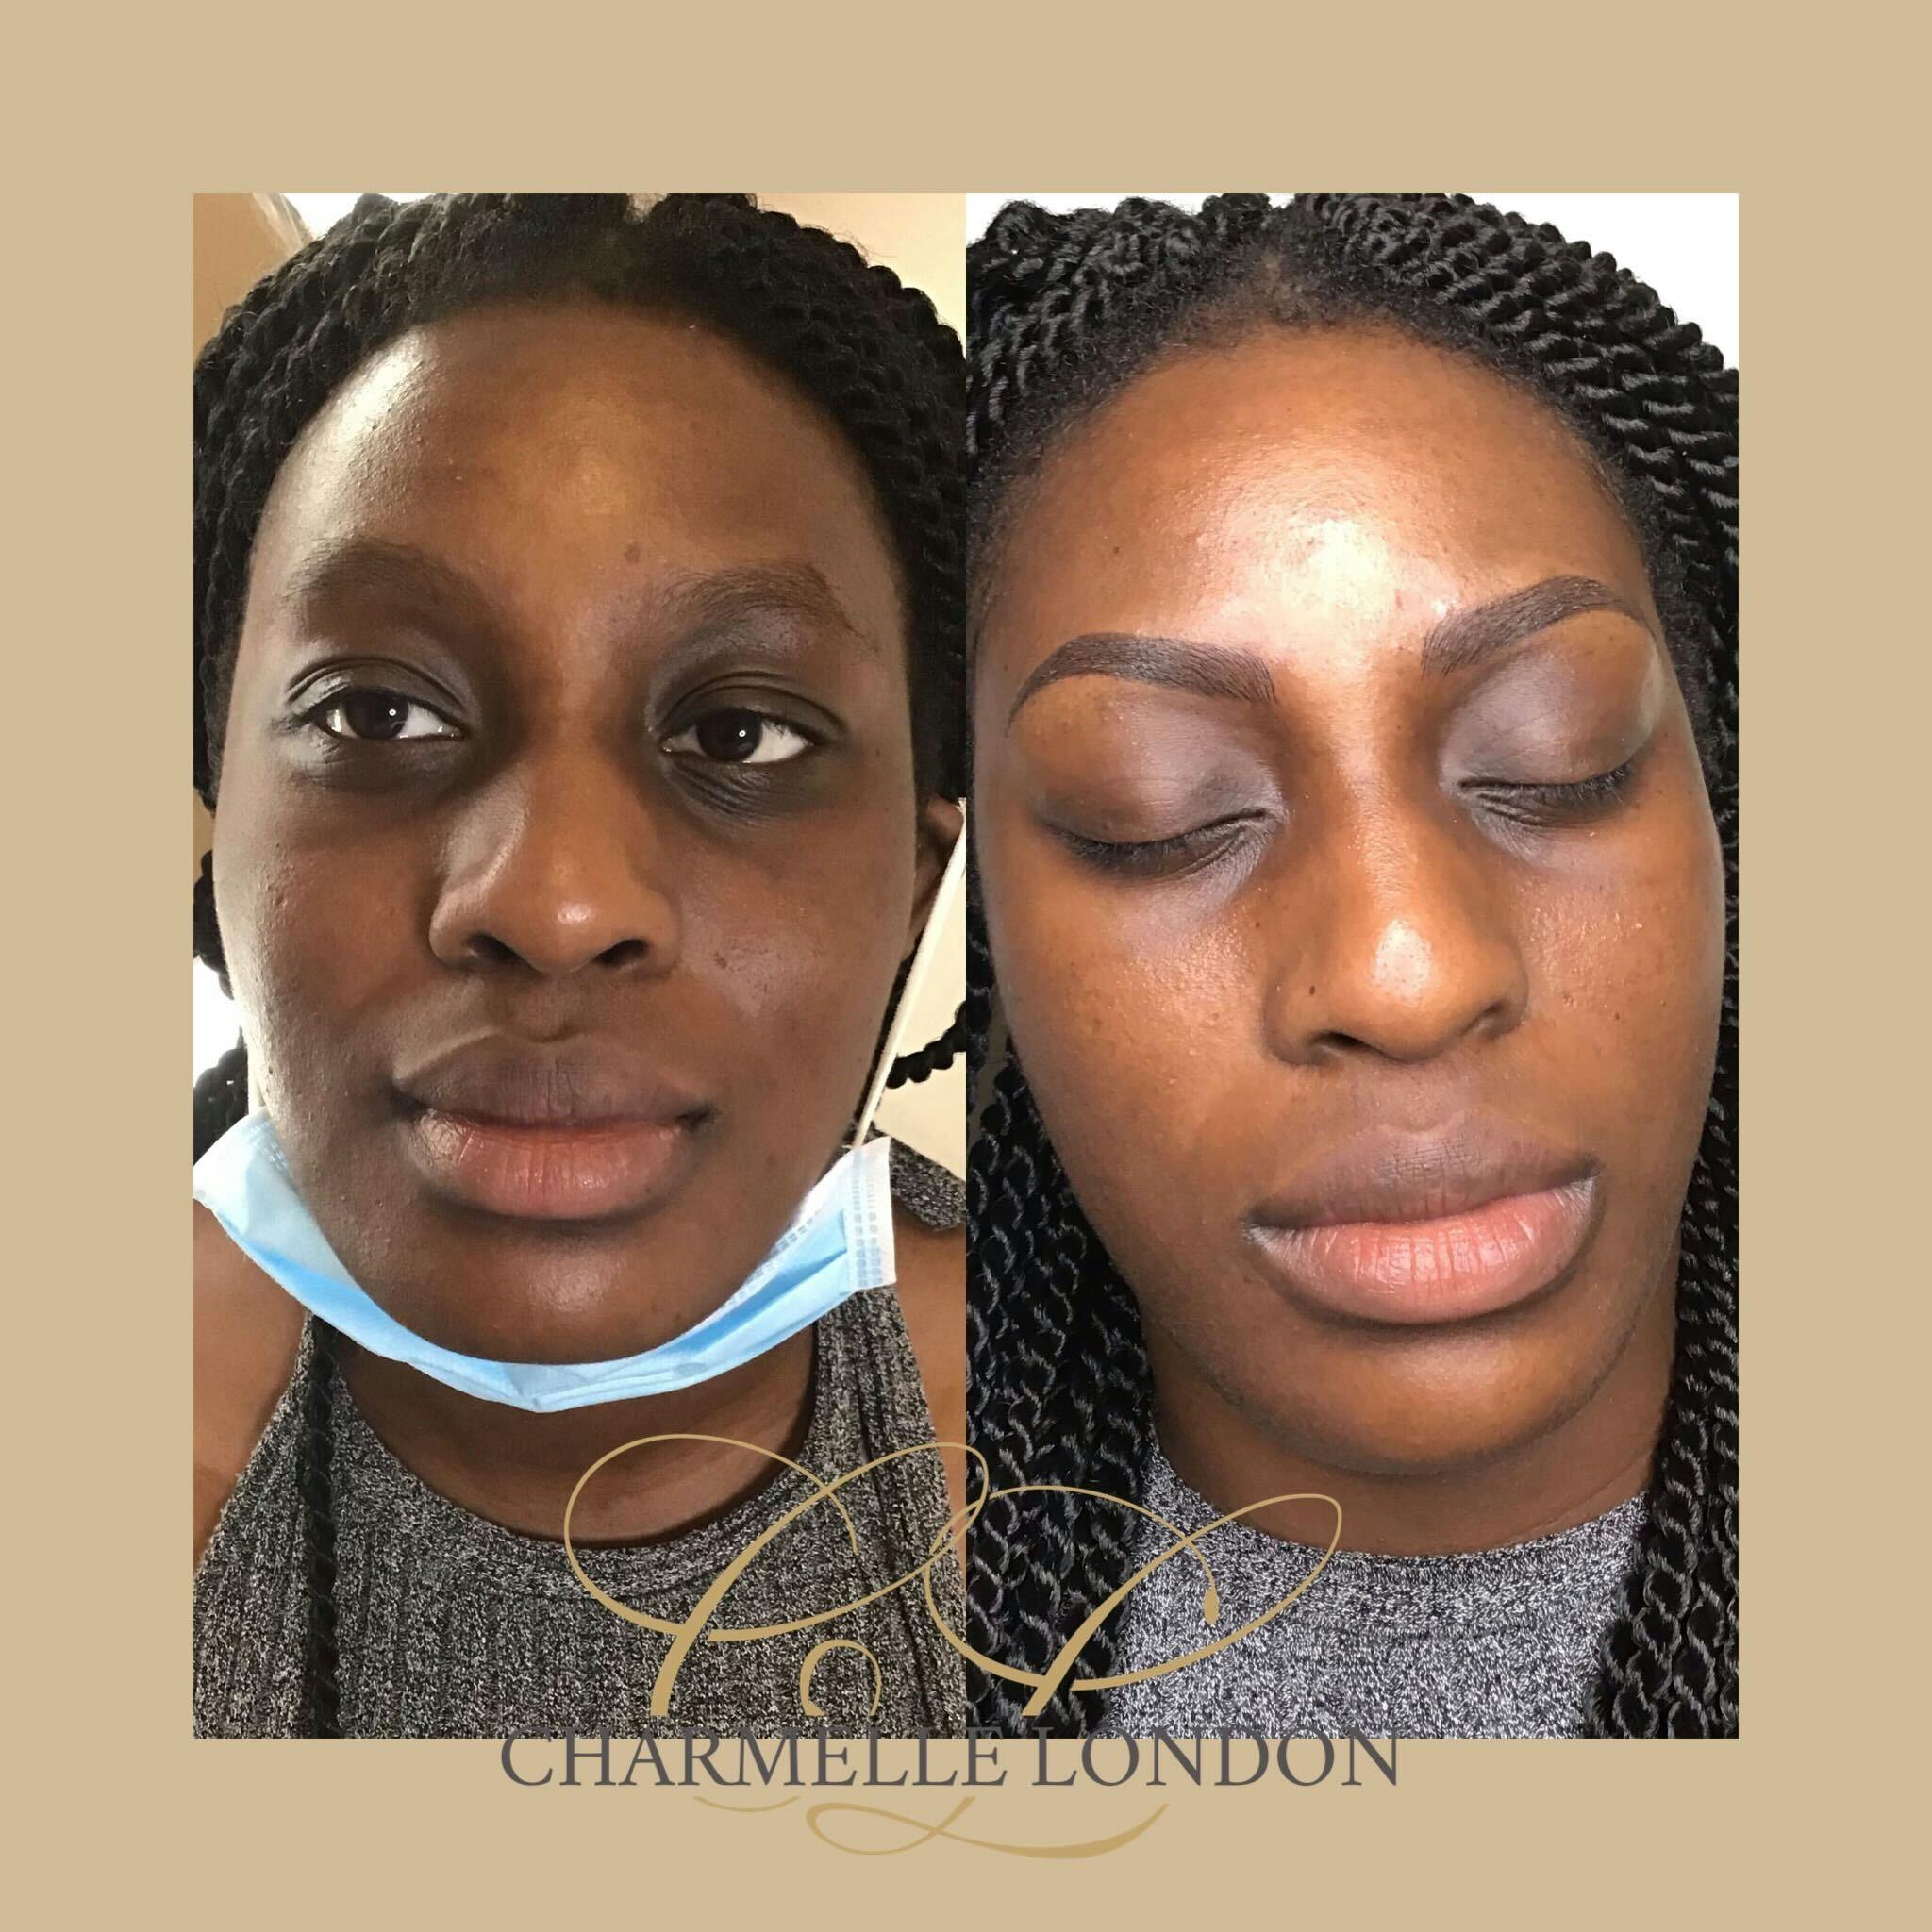 The team at Charmelle London has many years of experience and have delivered new looks for hundreds of clients.

We deliver permanent makeup services across brows, eyes and lips unique to your features.

Whether you are looking for something soft and natural or to create more of a statement look, we use the best products and techniques available to create truly bespoke and utterly flawless results for our clients